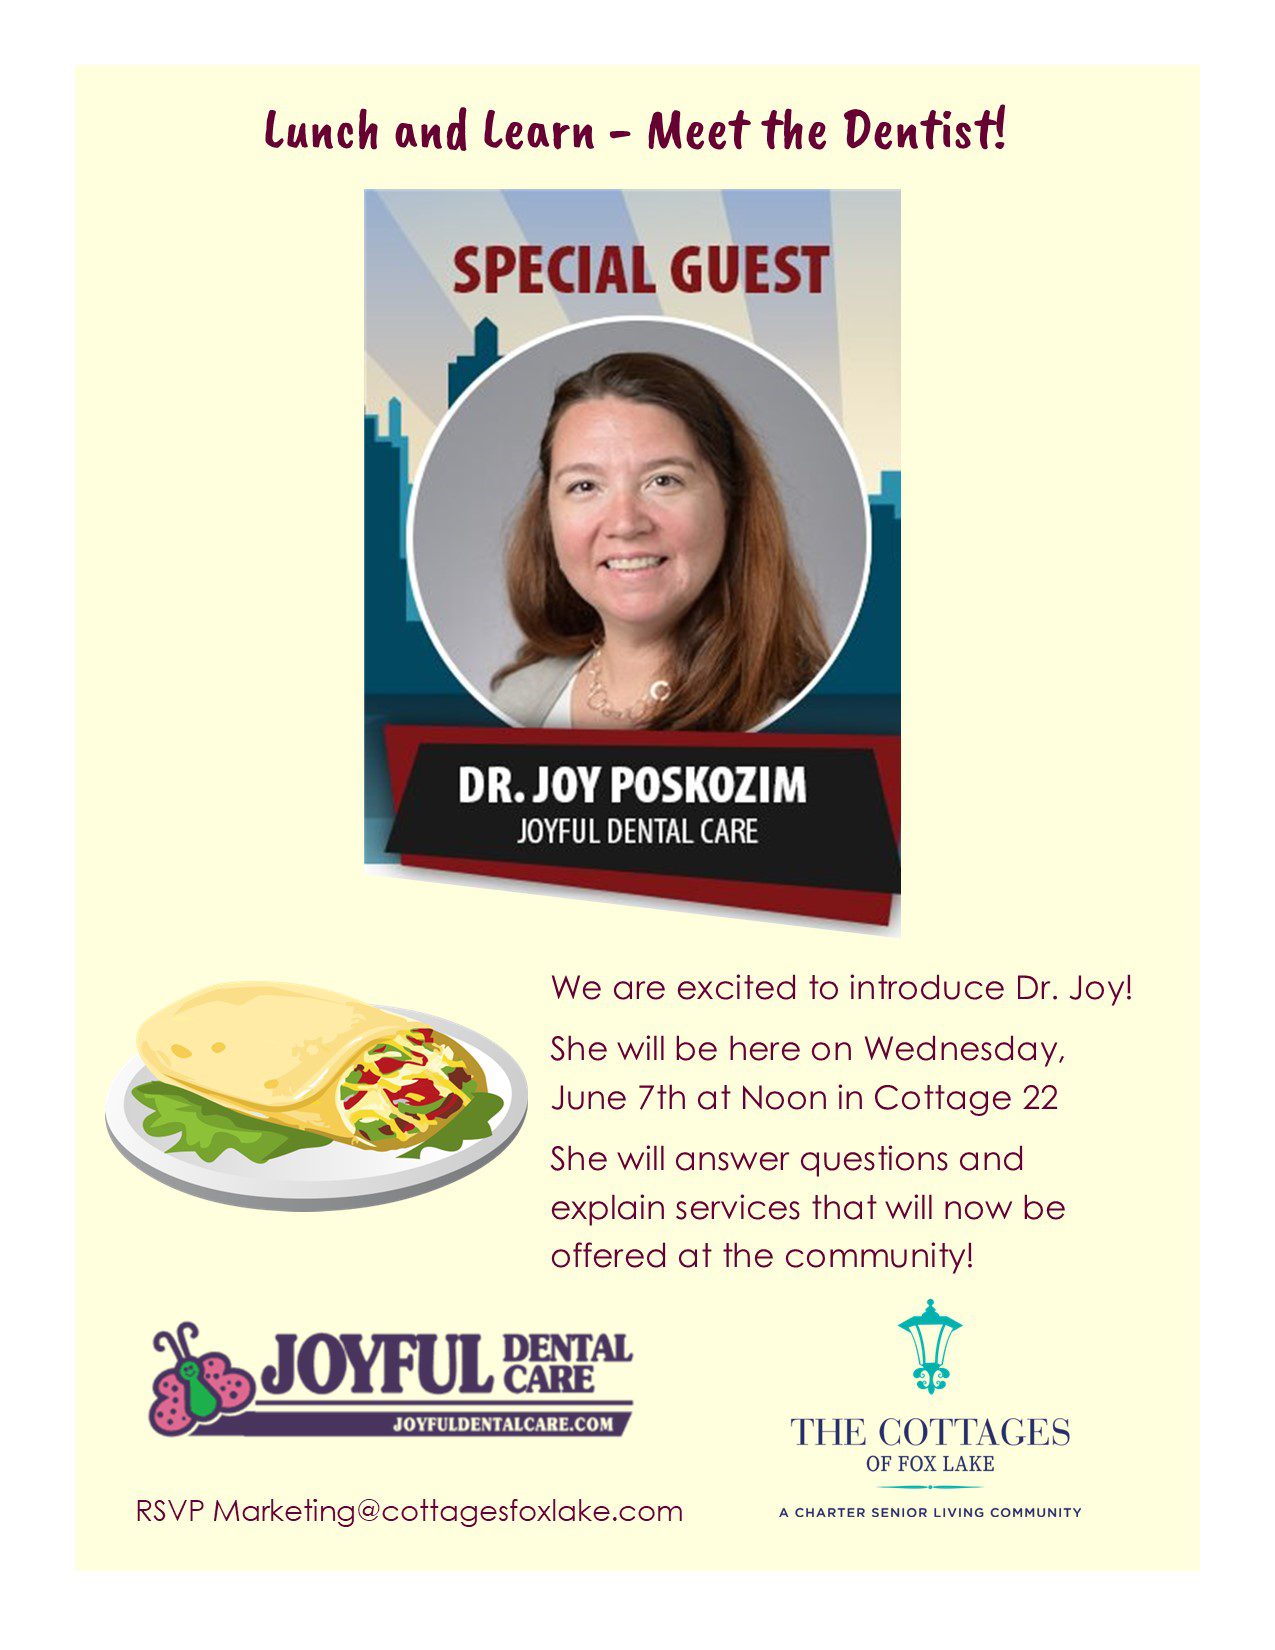 Cottages of Fox Lake - Assisted Living and Memory Care - Dentist Dr. Joy Poskozim